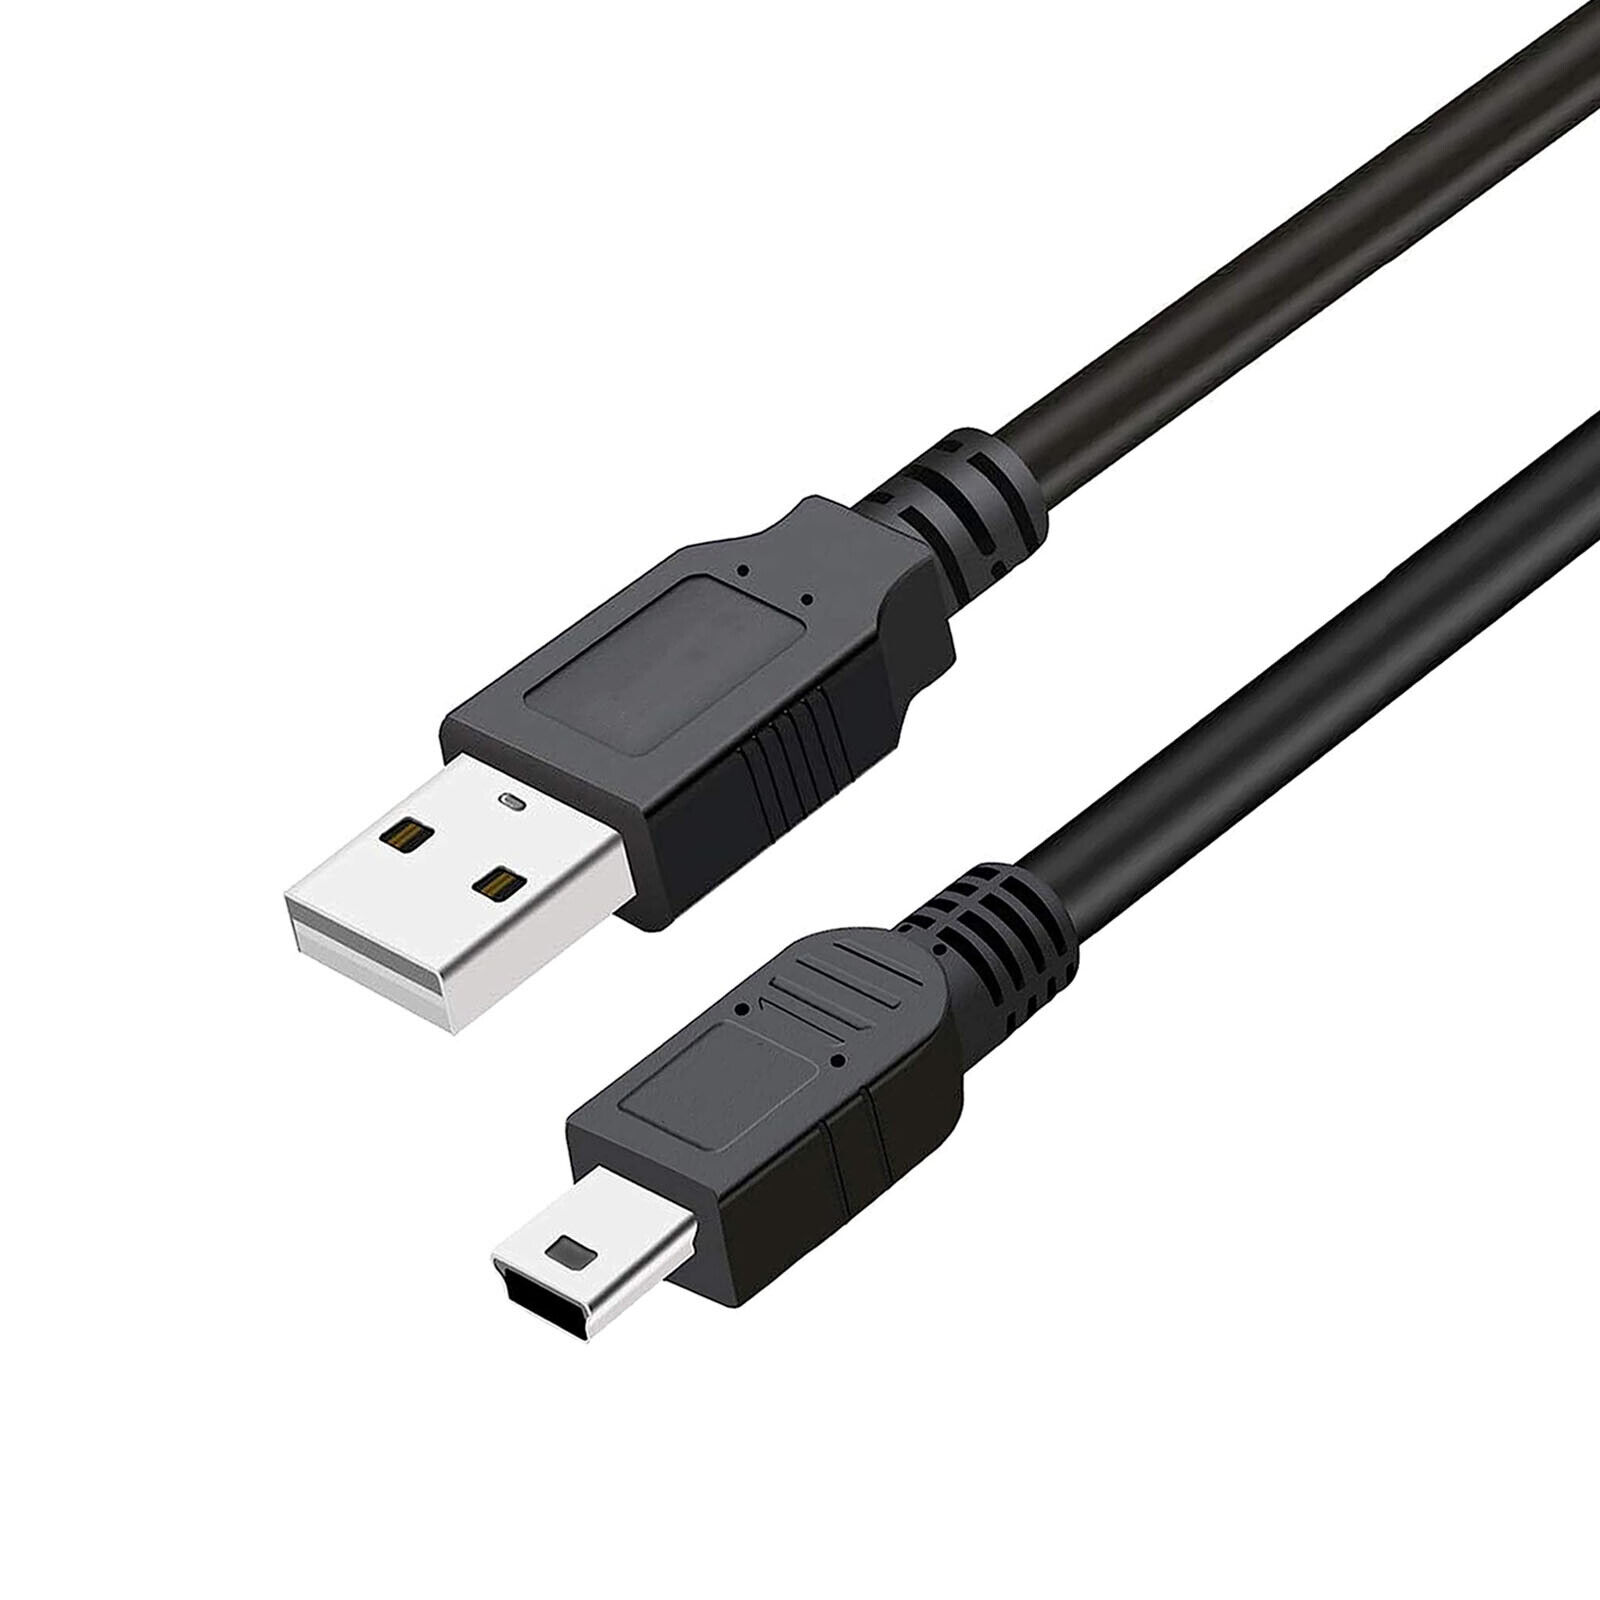 4ft Mini USB 2.0 Charging Data Cable Cord for Garmin Drive Assist 50LM 50LMT GPS